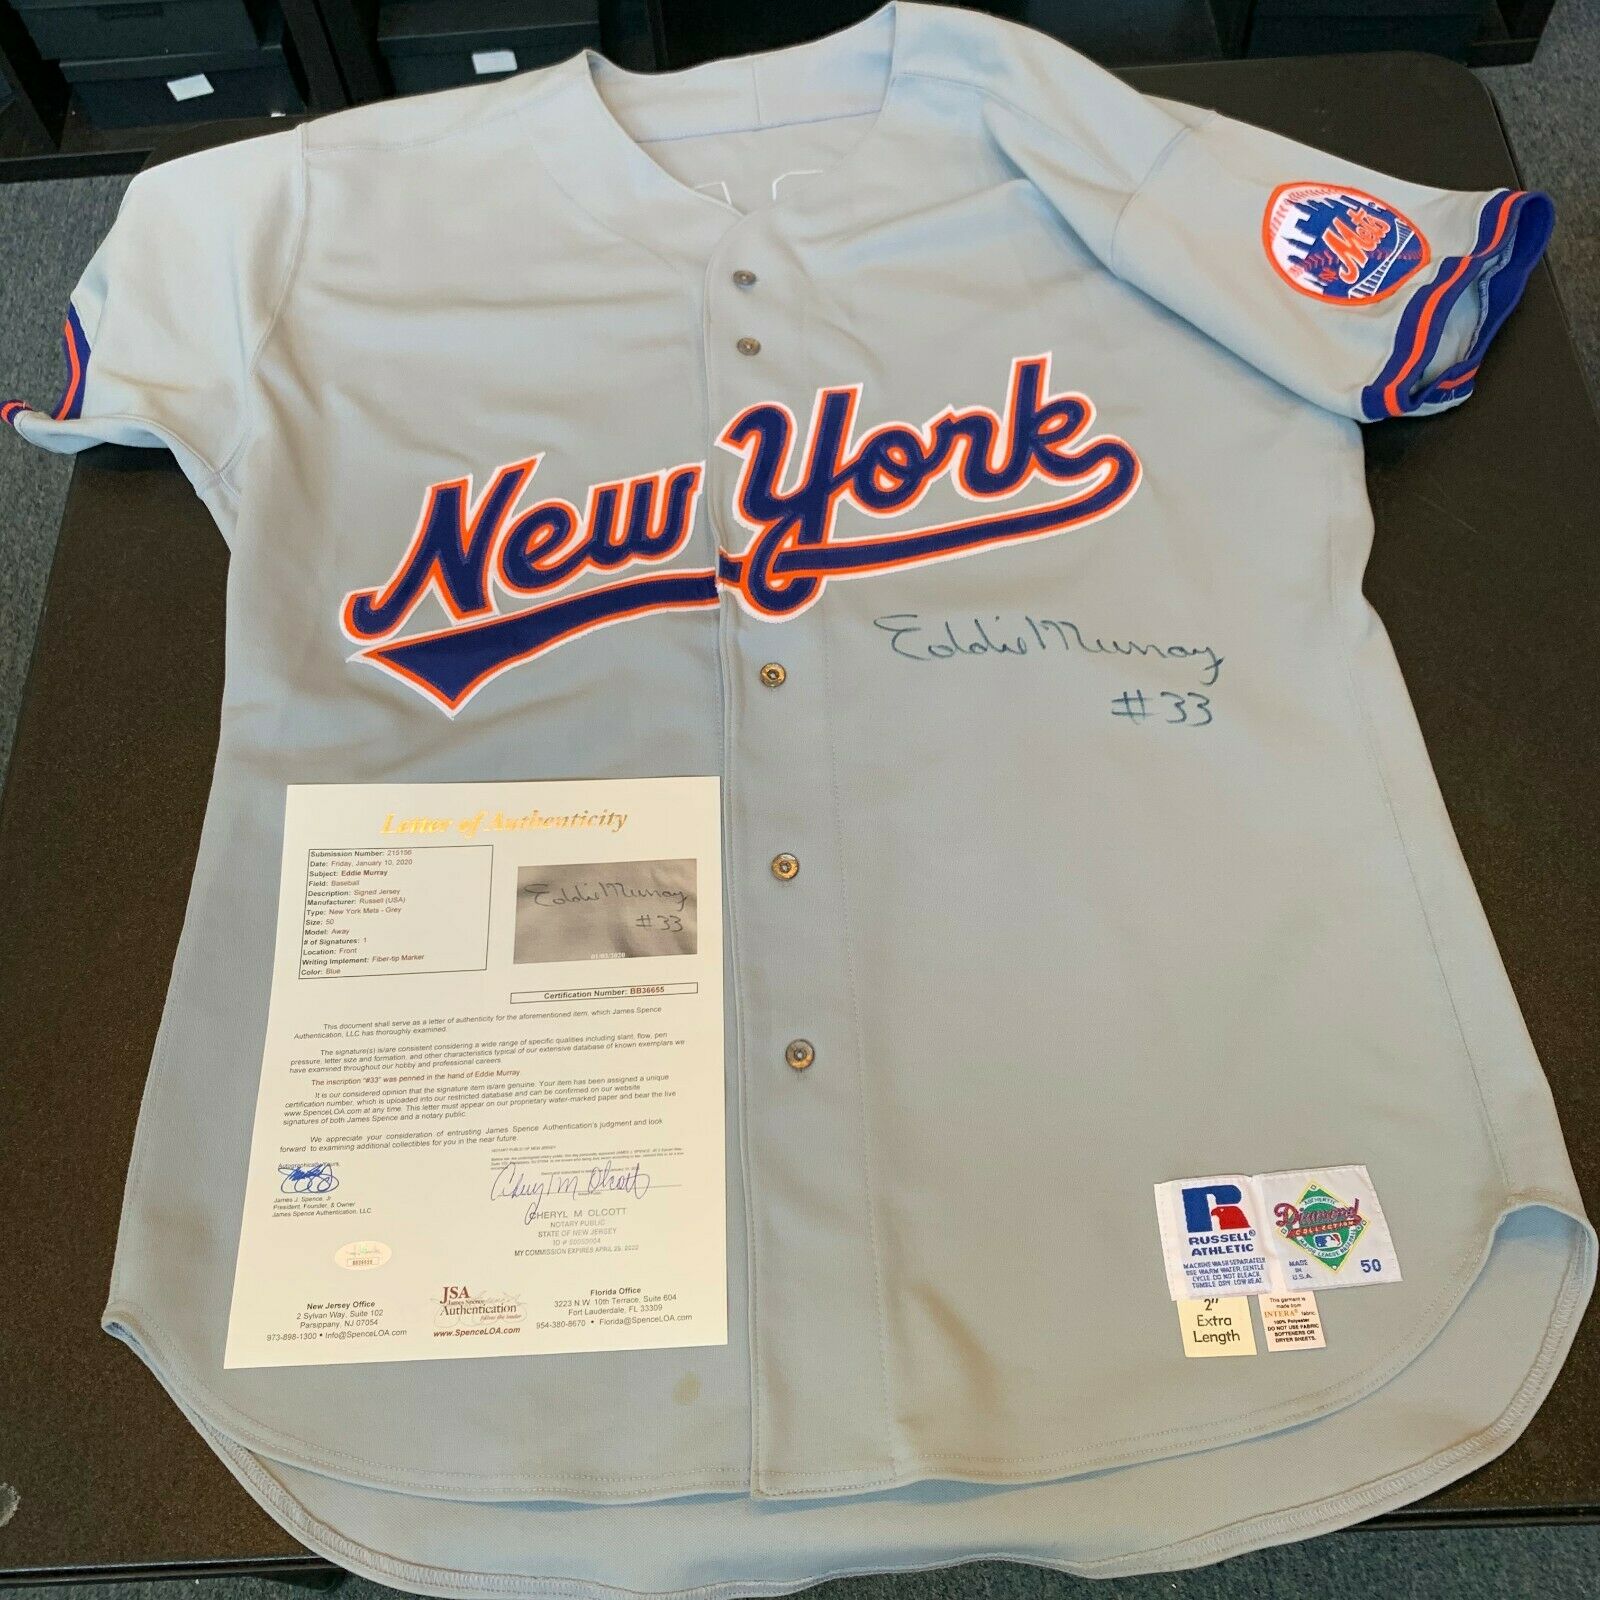 eddie murray autographed jersey